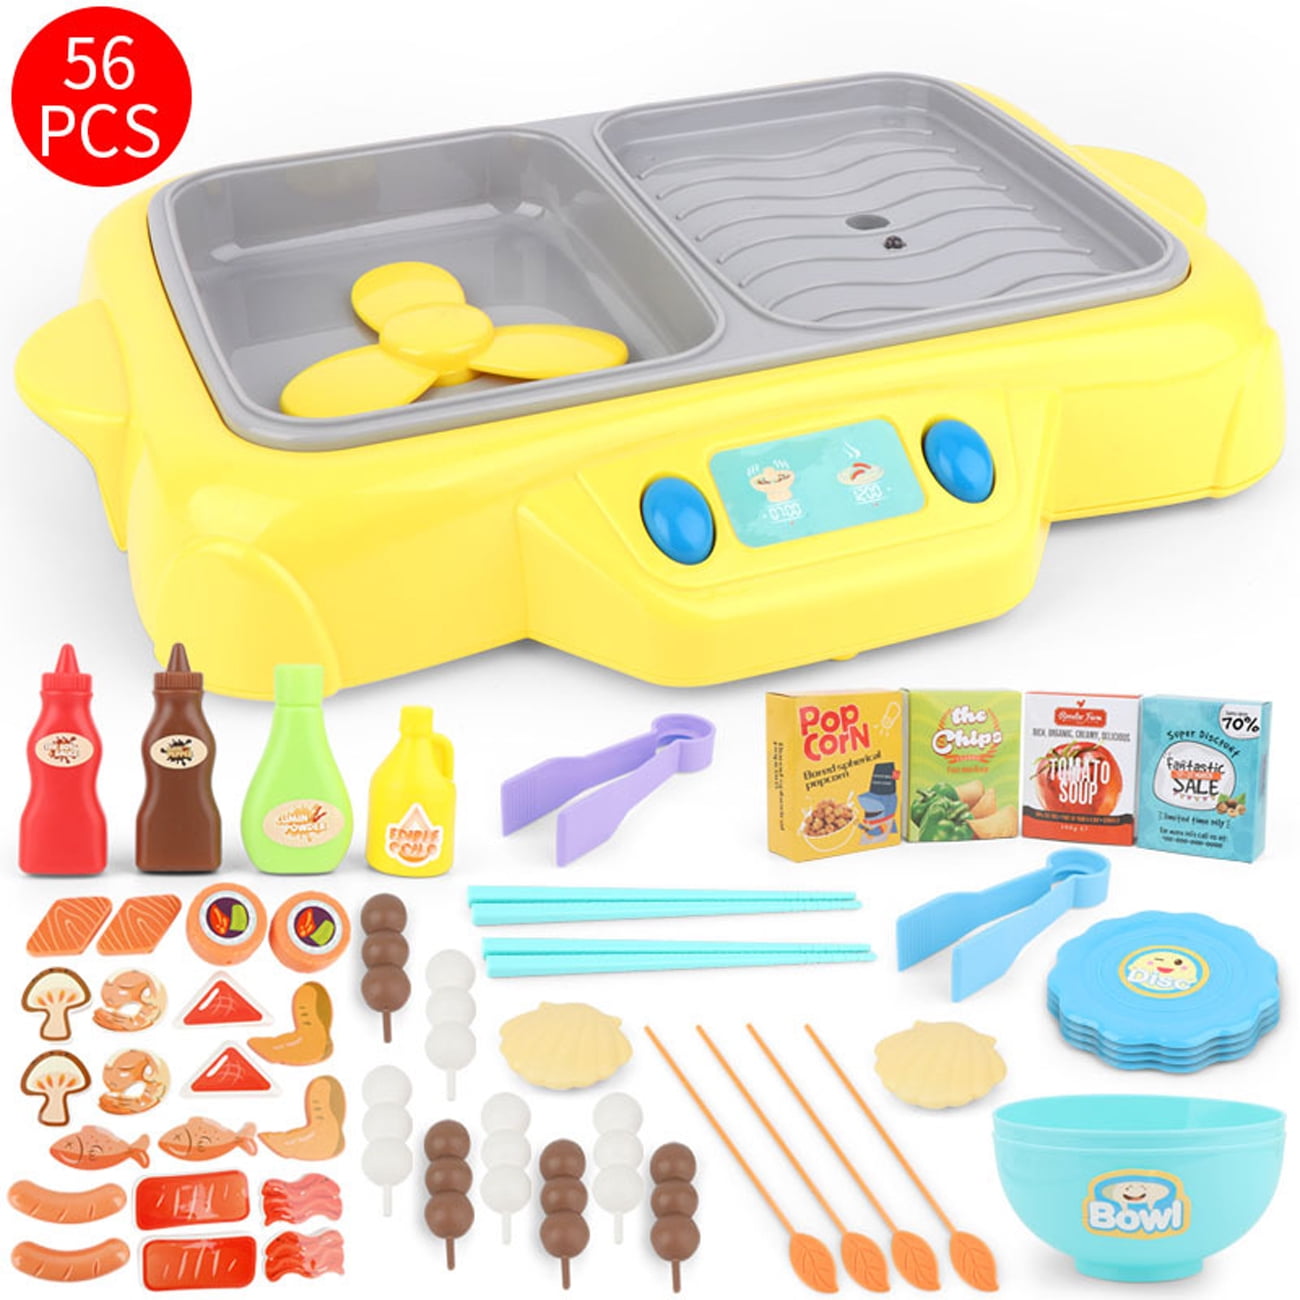 Details about   BBQ Simulation kitchen toys,hot pot spray Barbecue toy set,cooking game White 